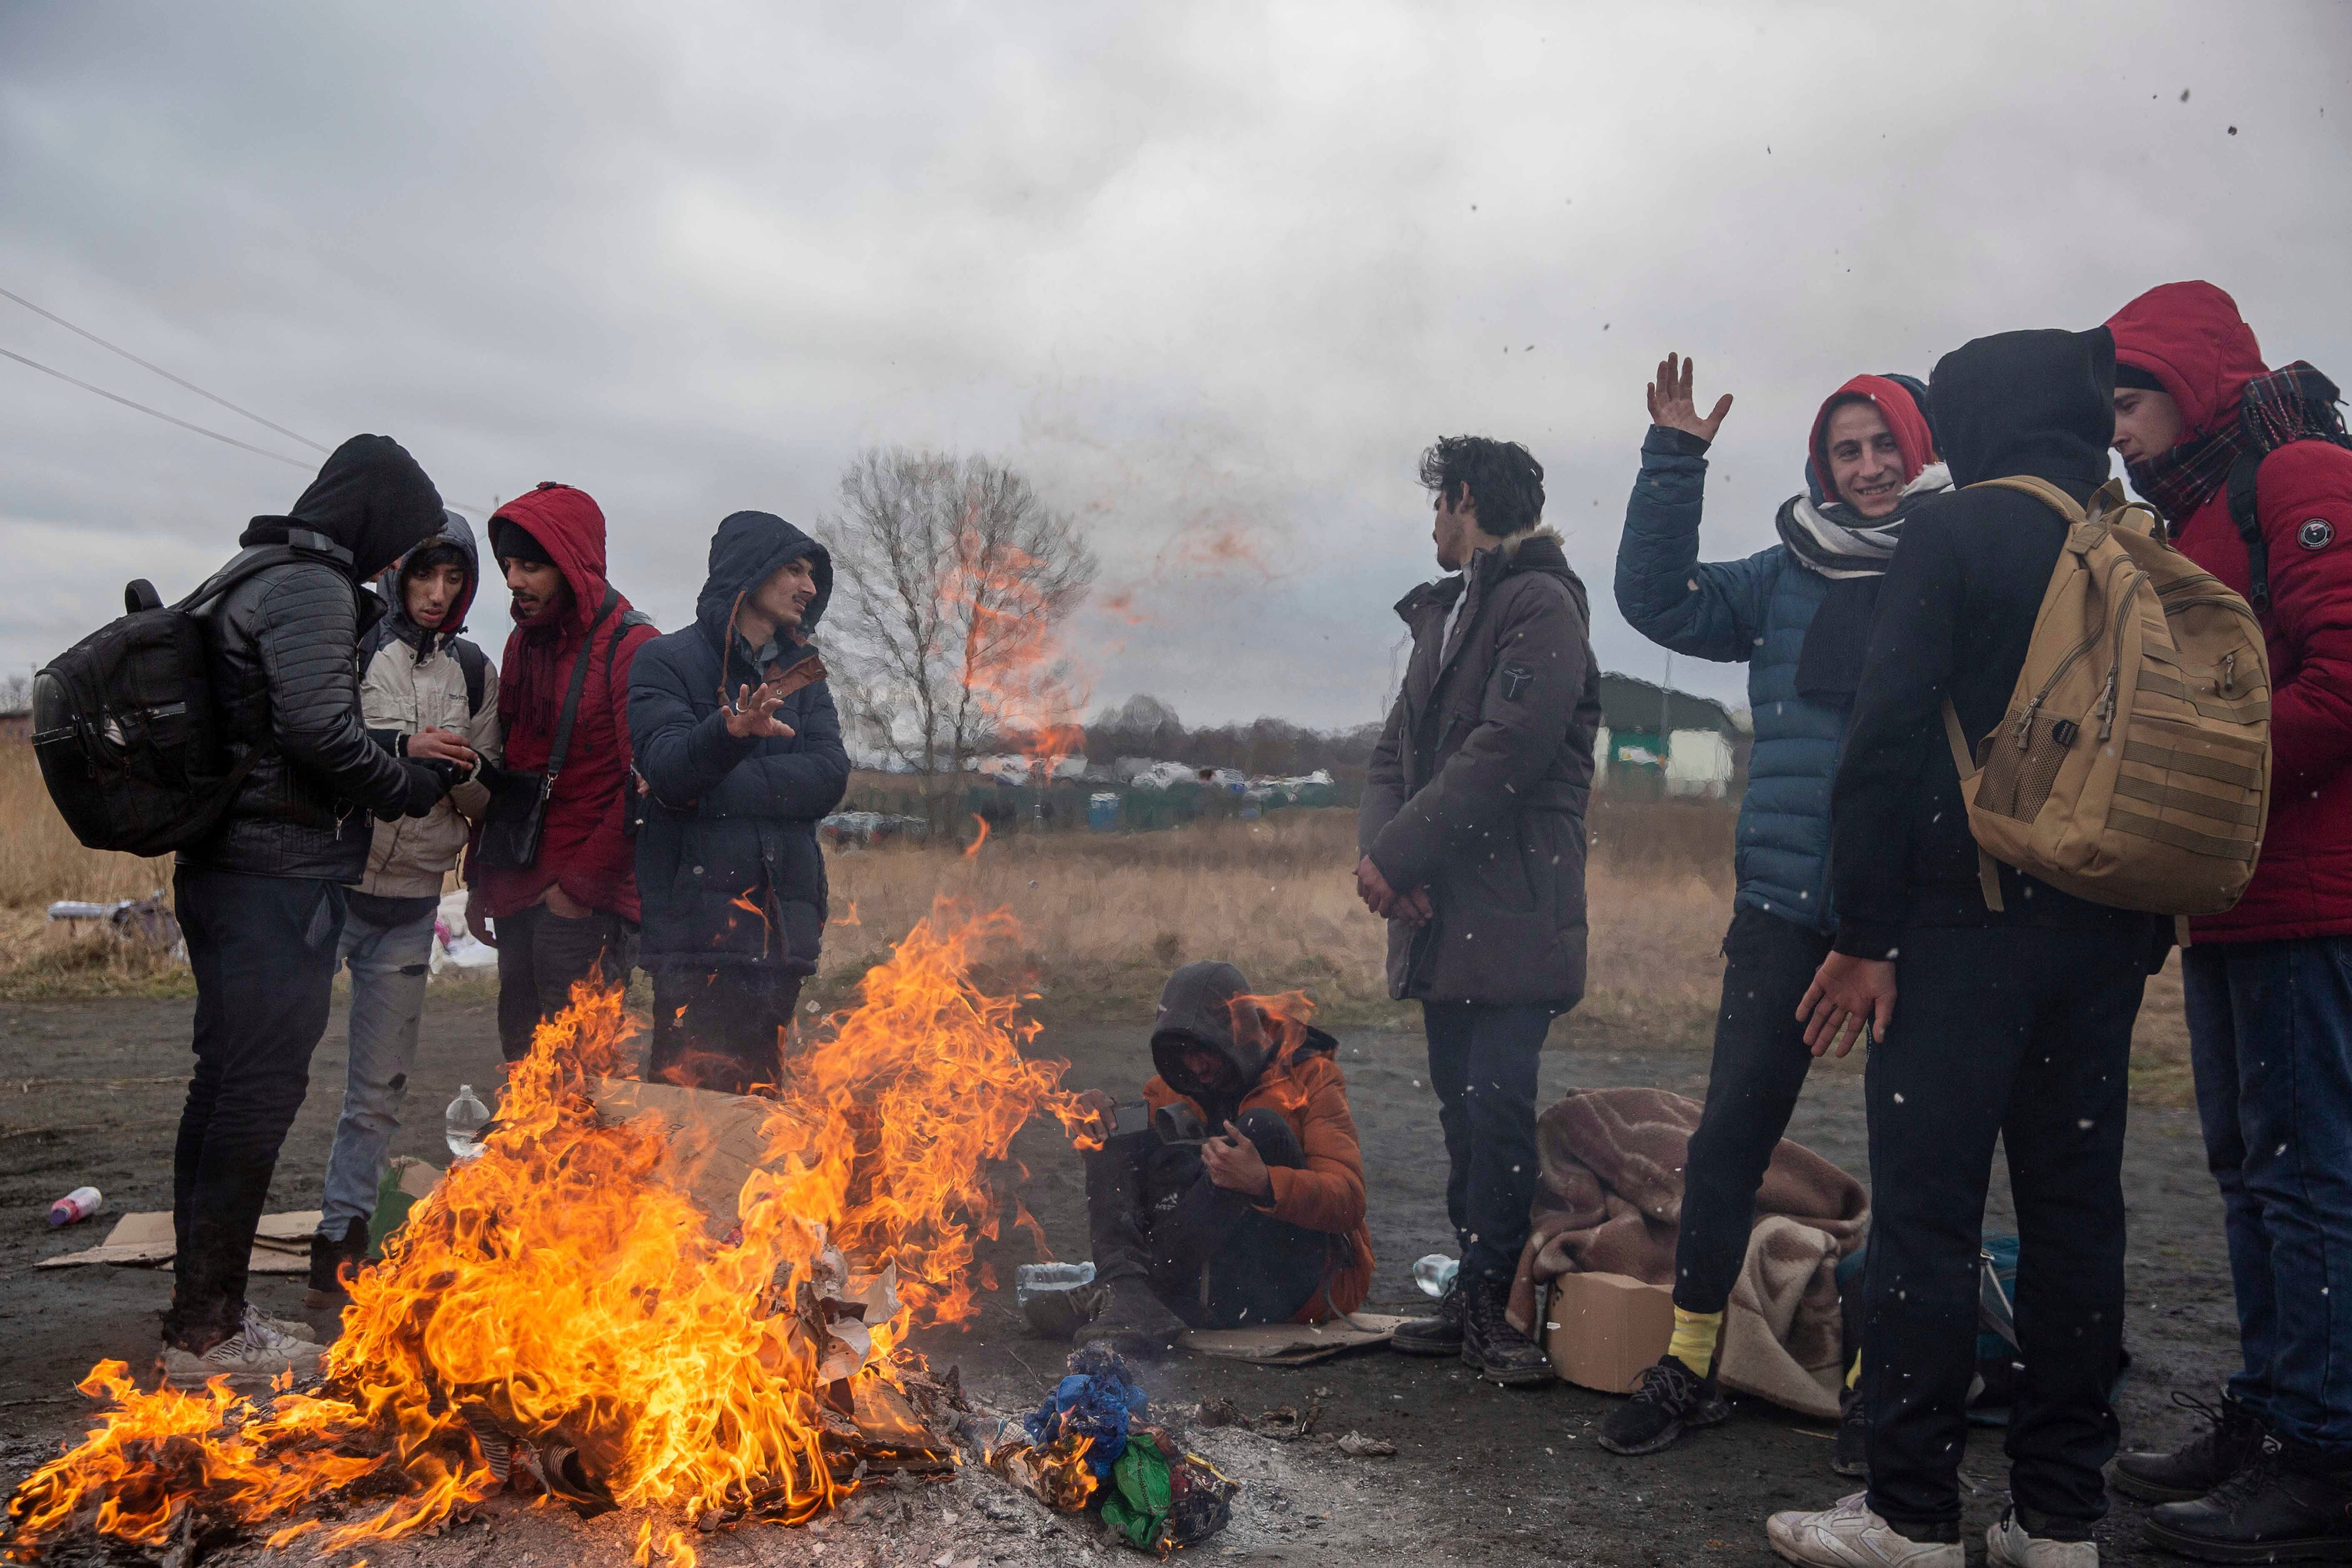 Refugees fleeing conflict in Ukraine warm up near a fire after arriving at the Medyka border crossing in Poland, Monday, Feb. 28, 2022.